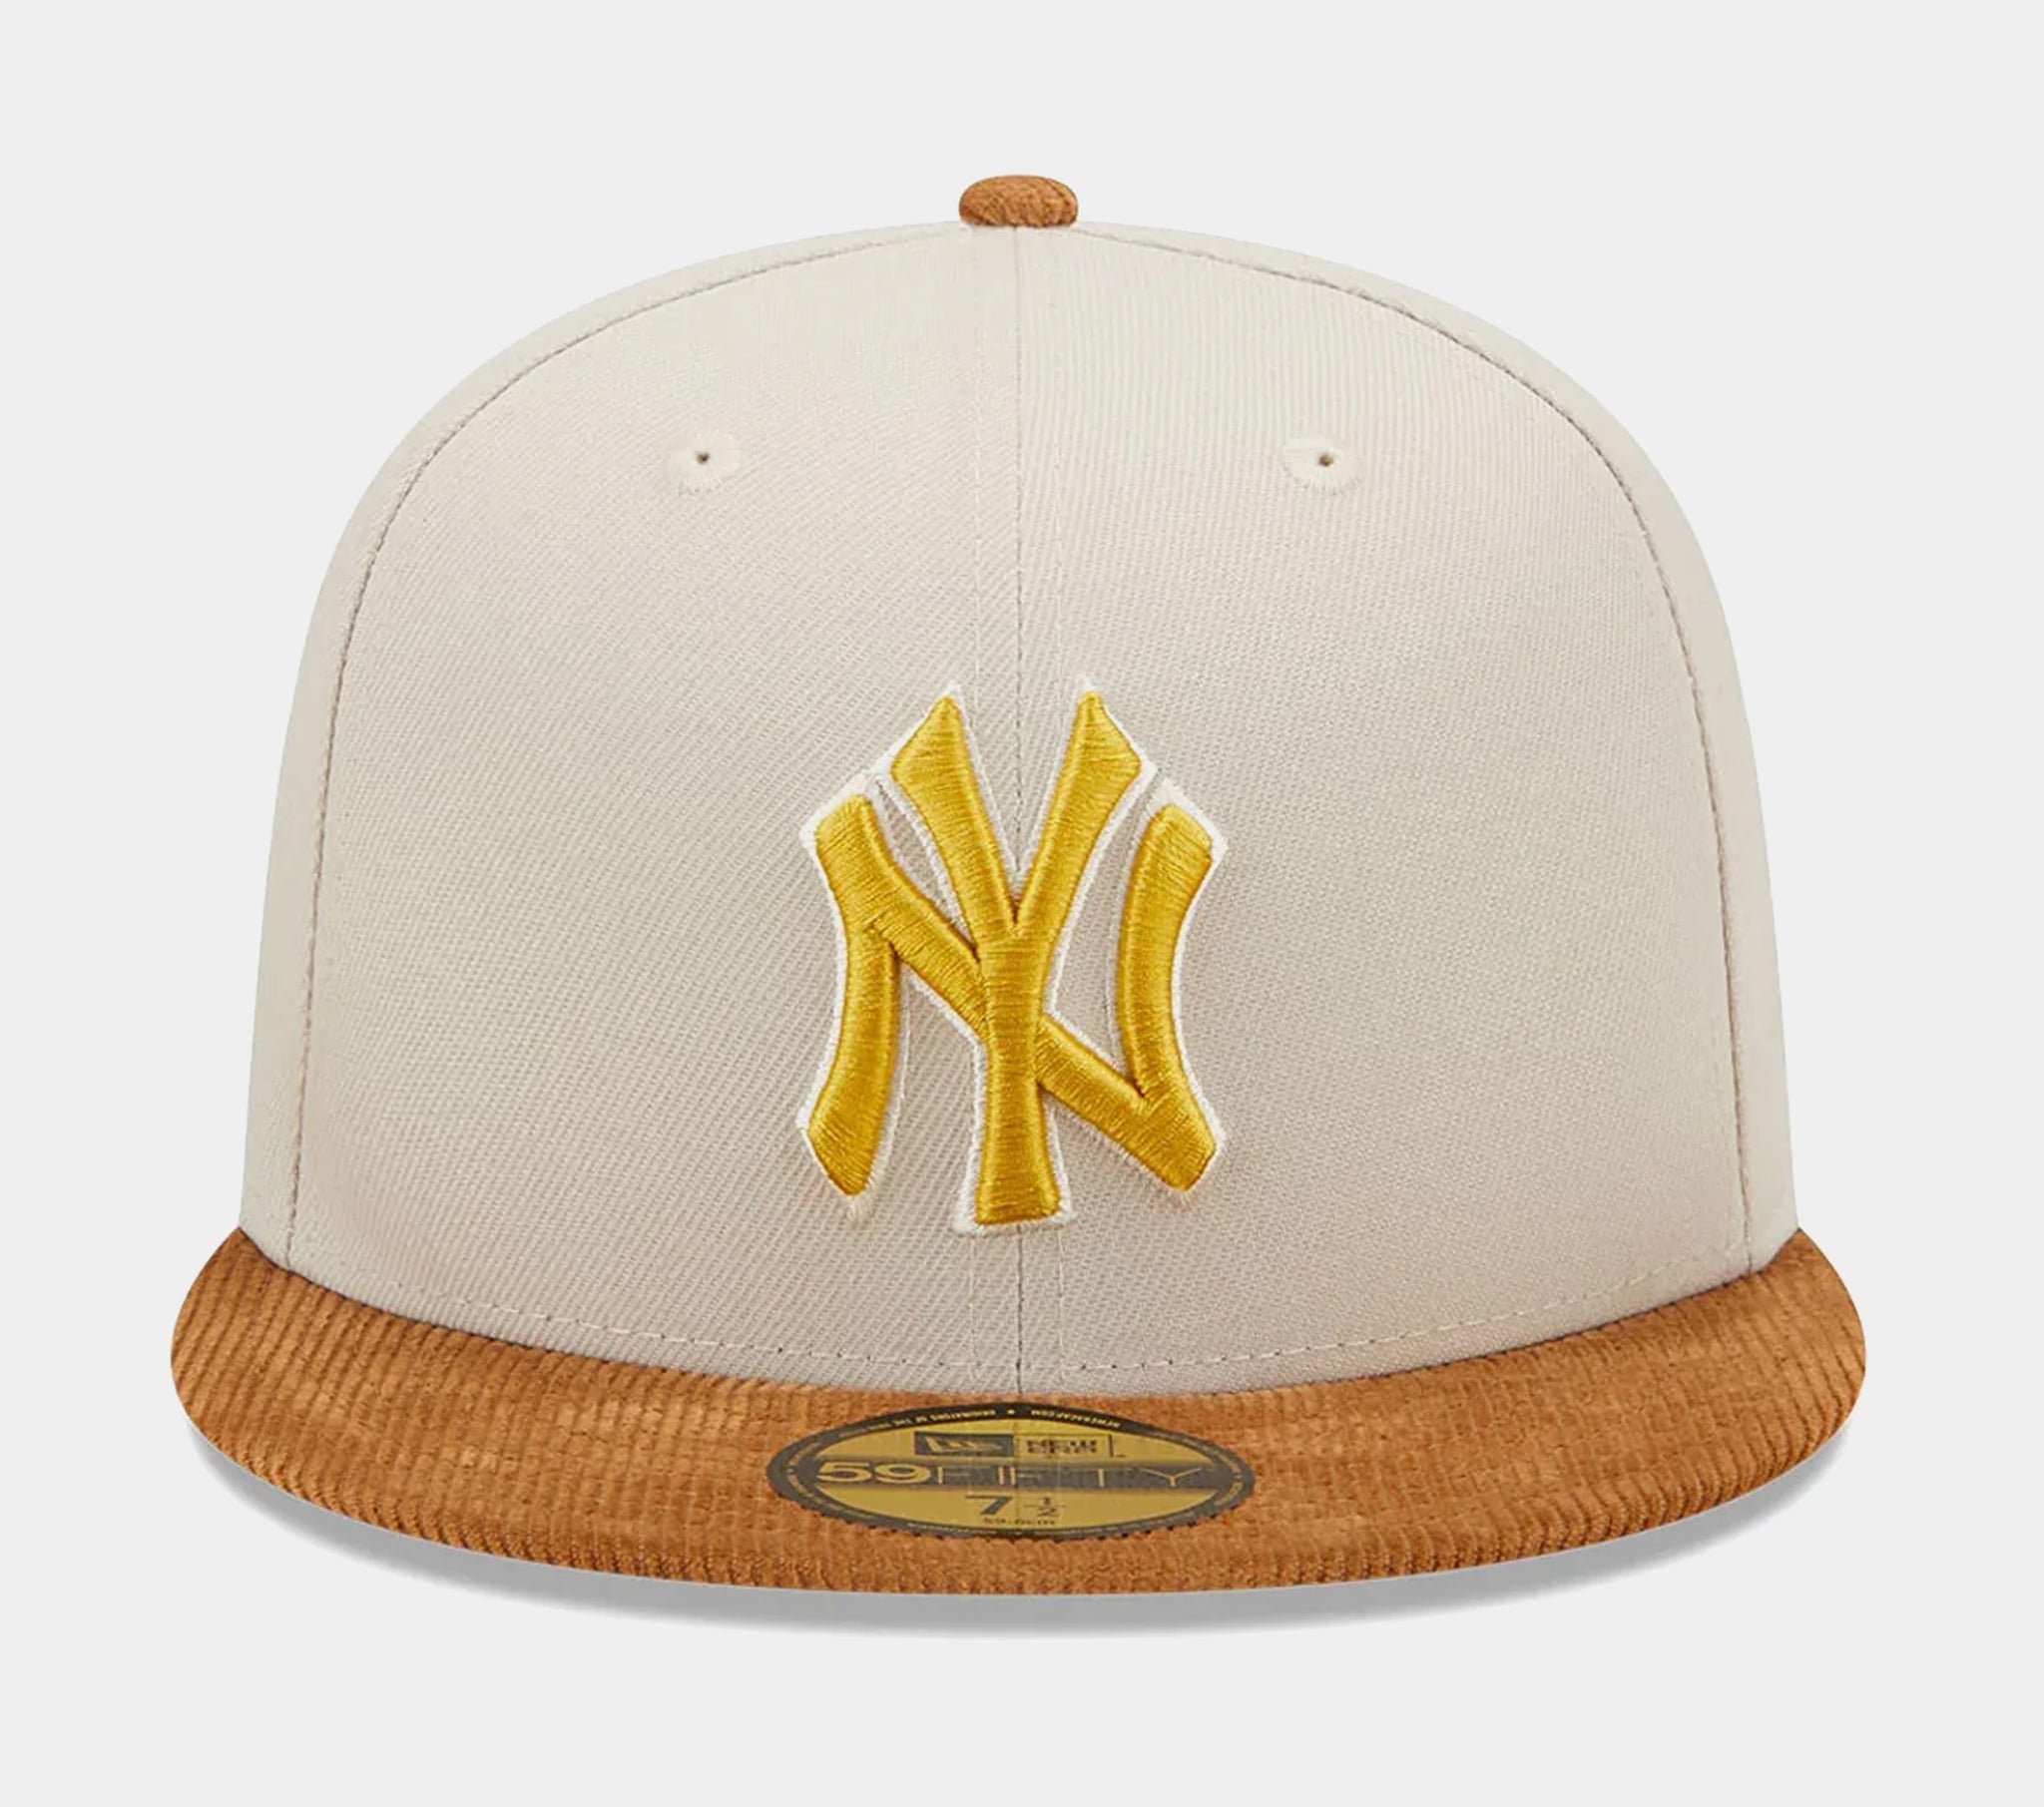 New York Yankees Corduroy Visor 59FIFTY Mens Fitted Hat (White/Brown)